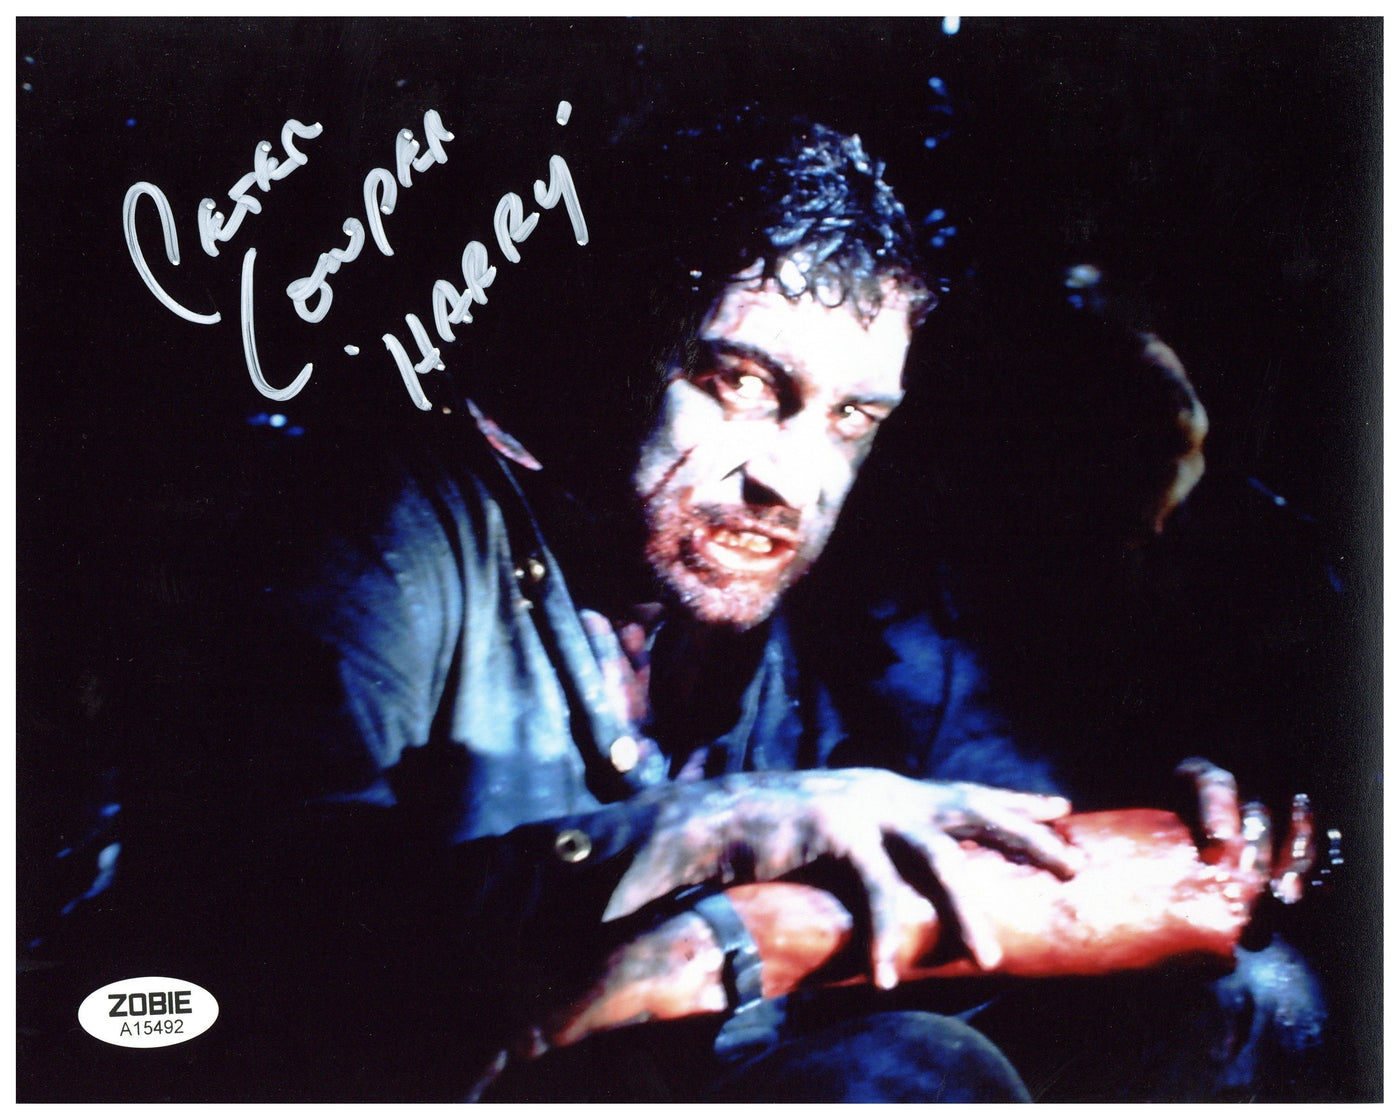 Peter Cowper Signed 8x10 Photo My Bloody Valentine The Miner Autographed JSA COA 3